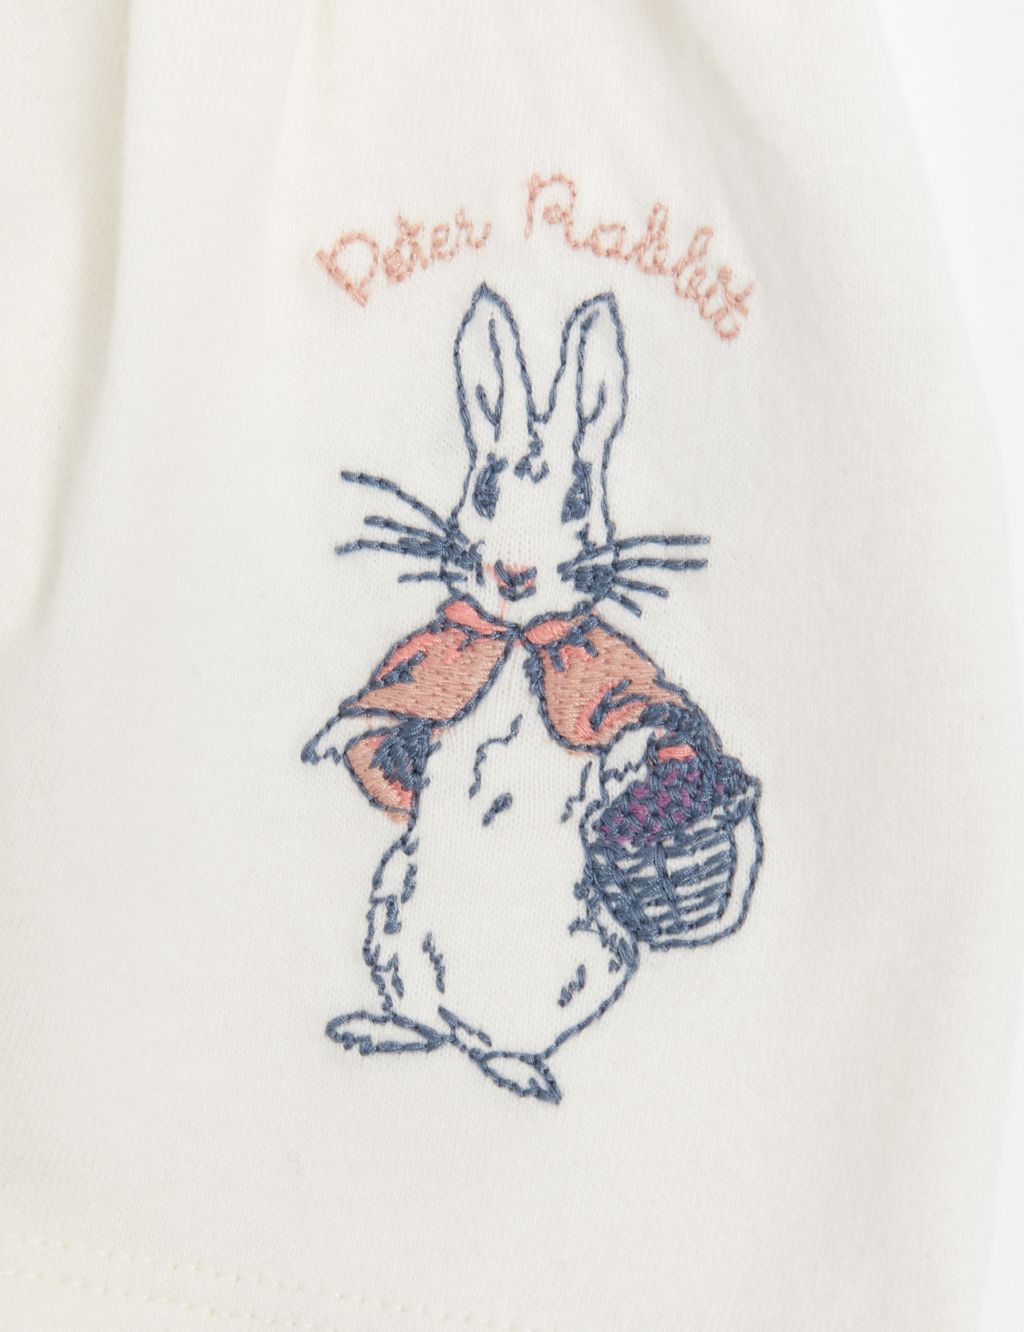 2pc Cotton Rich Peter Rabbit™ Outfit (0-3 Yrs) image 5